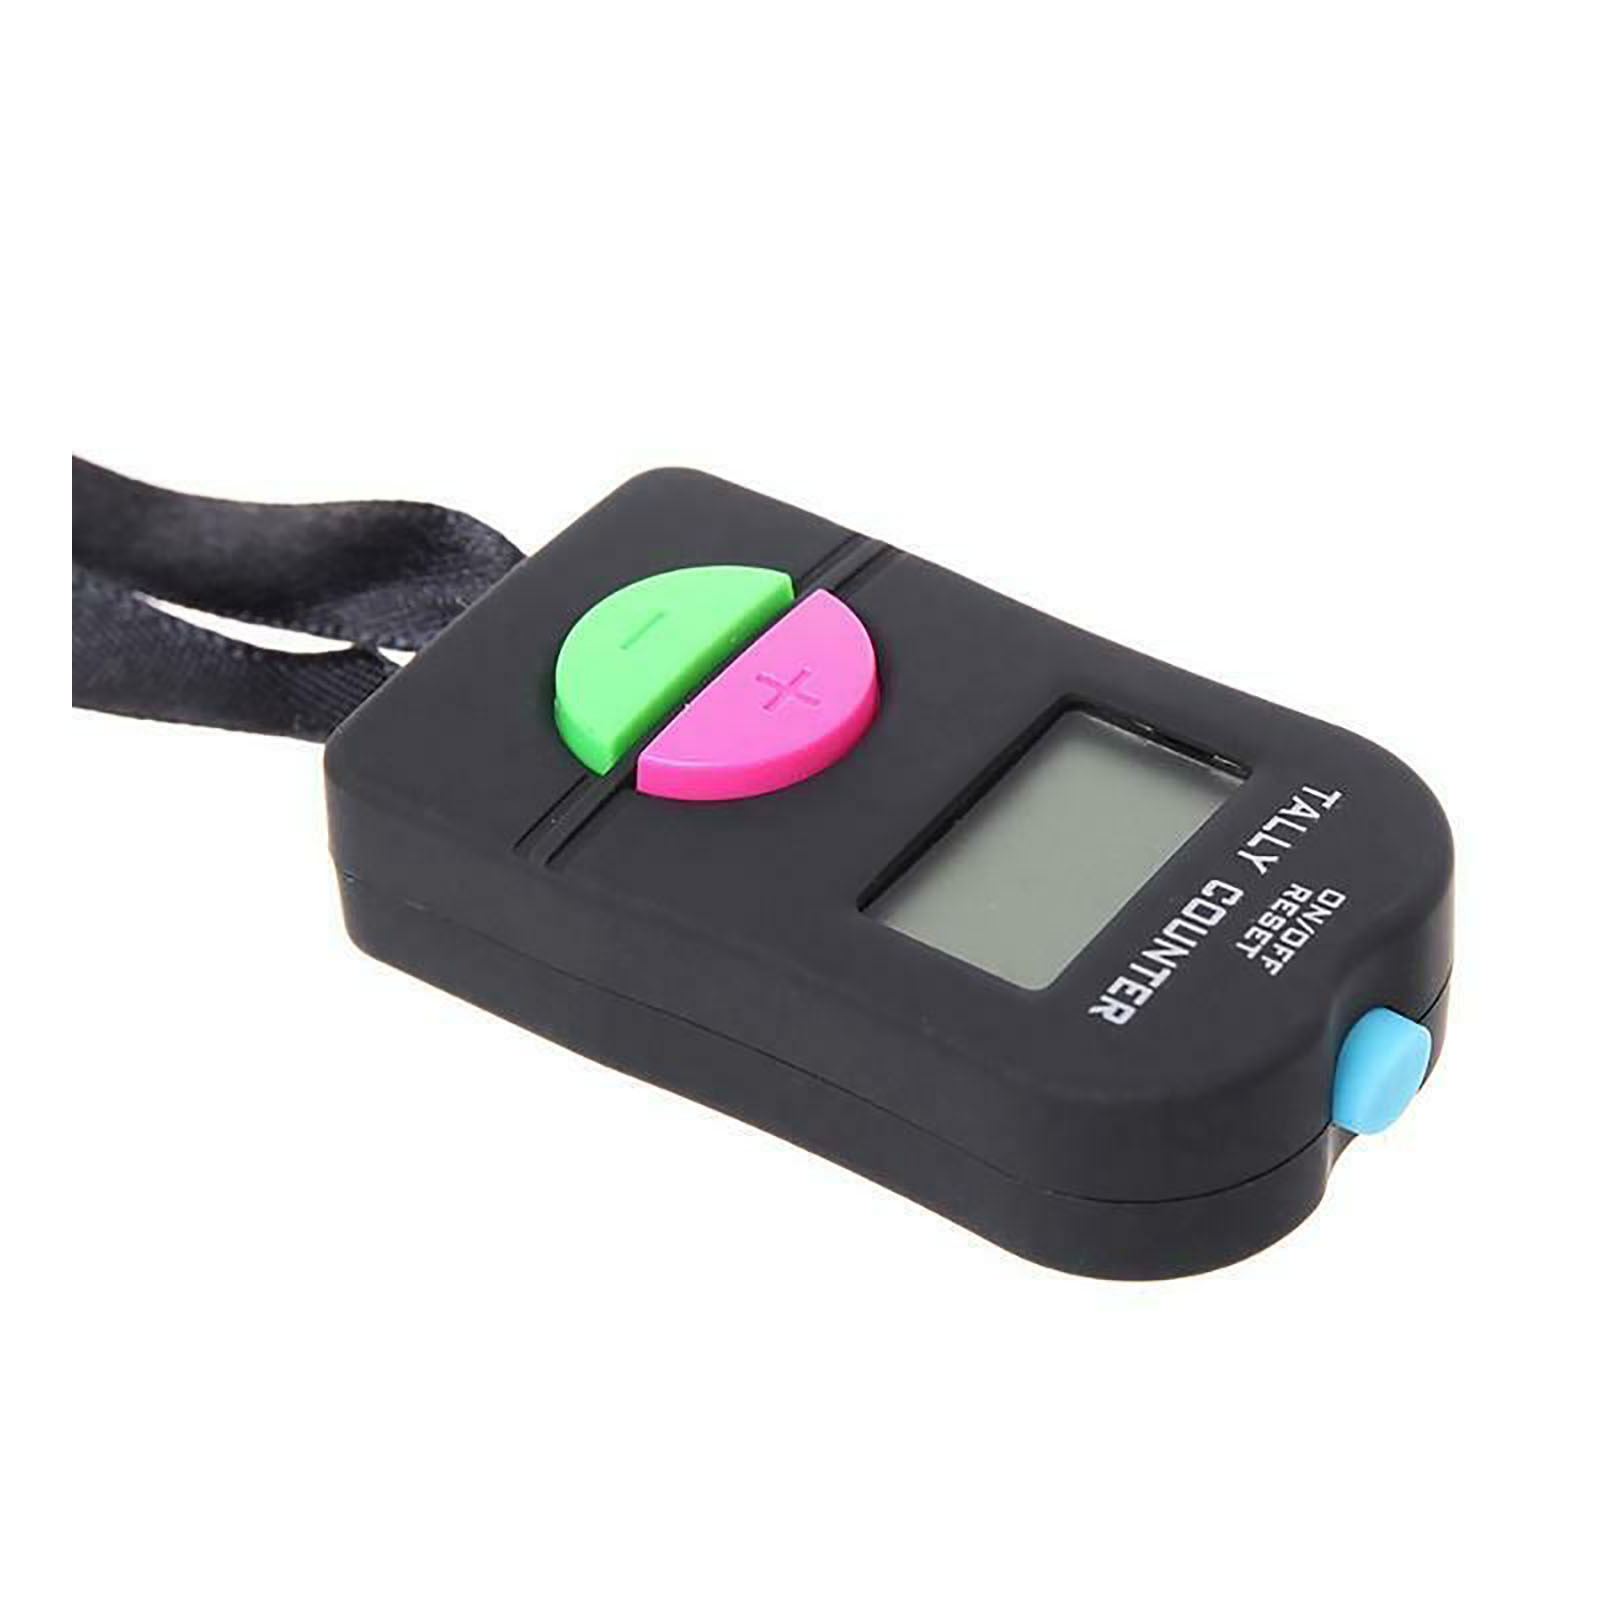 solacol Tally Counter Clicker Hand Tally Counter Golf Counter Clicker Digital Hand Tally Counter Electronic Manual Clicker Golf Gym Hand Held Counter Hand Counters Clickers - image 1 of 3